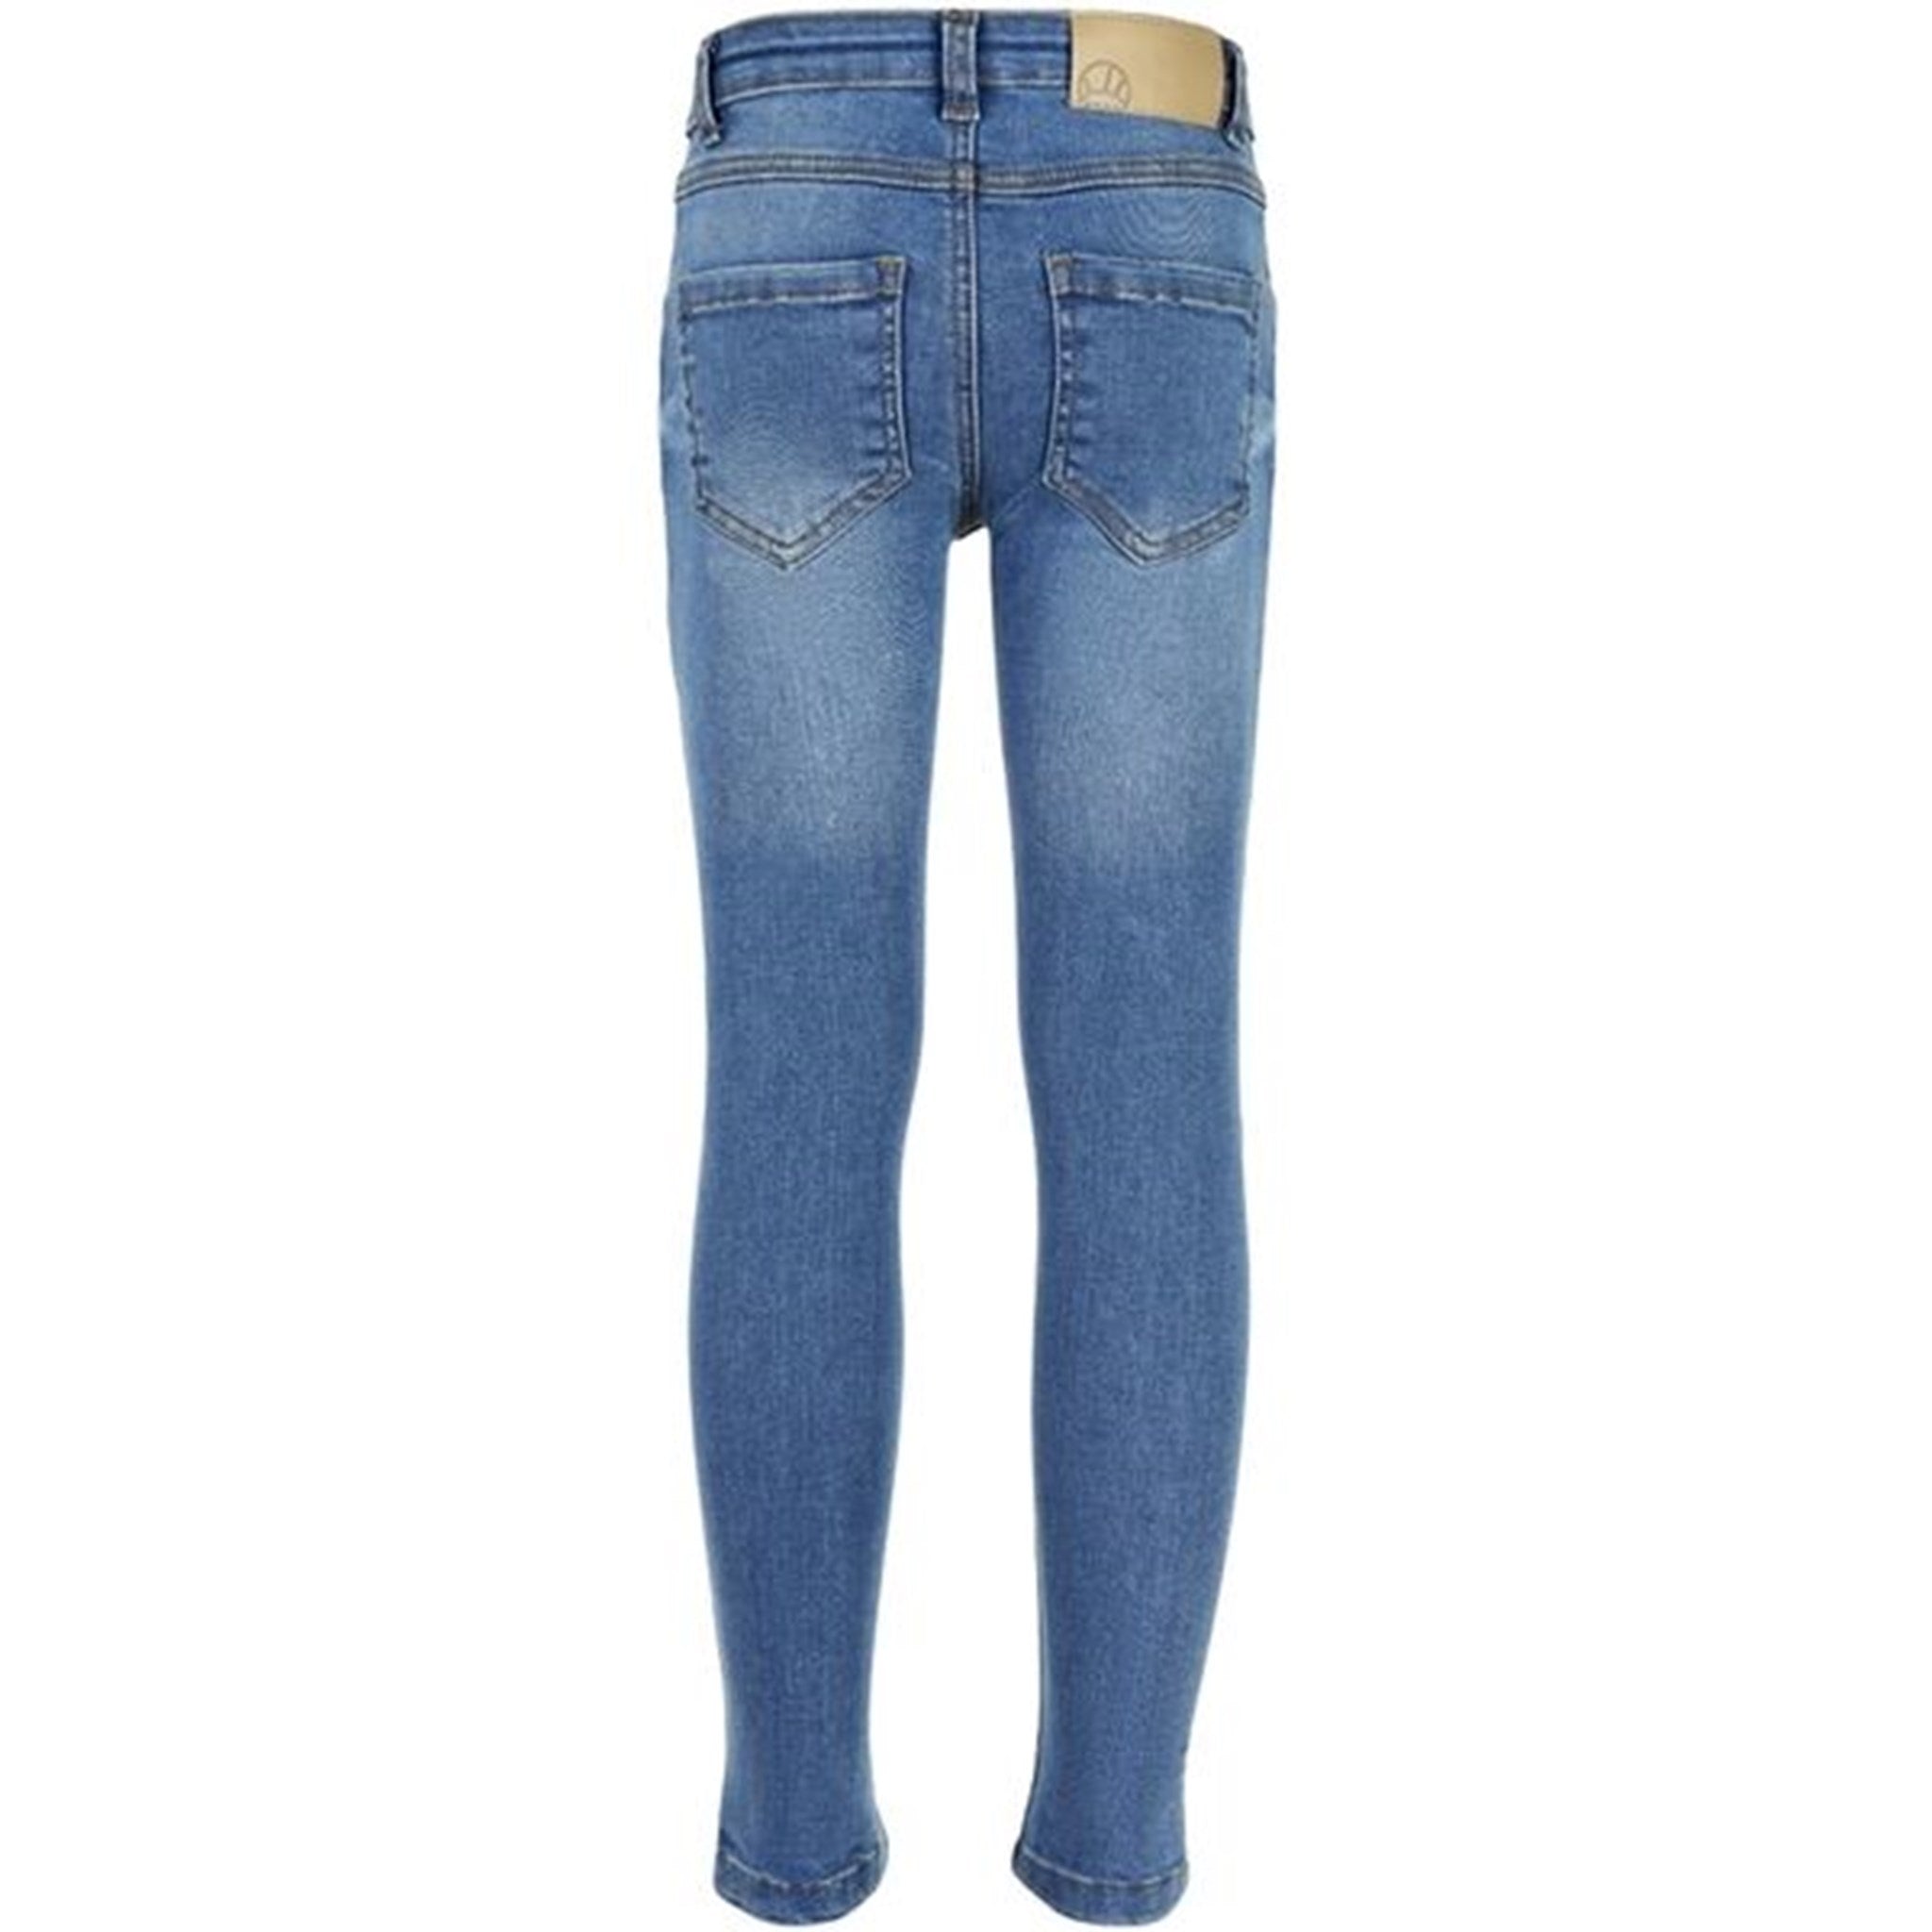 The New Oslo Super Slim Jeans Med Blue 2